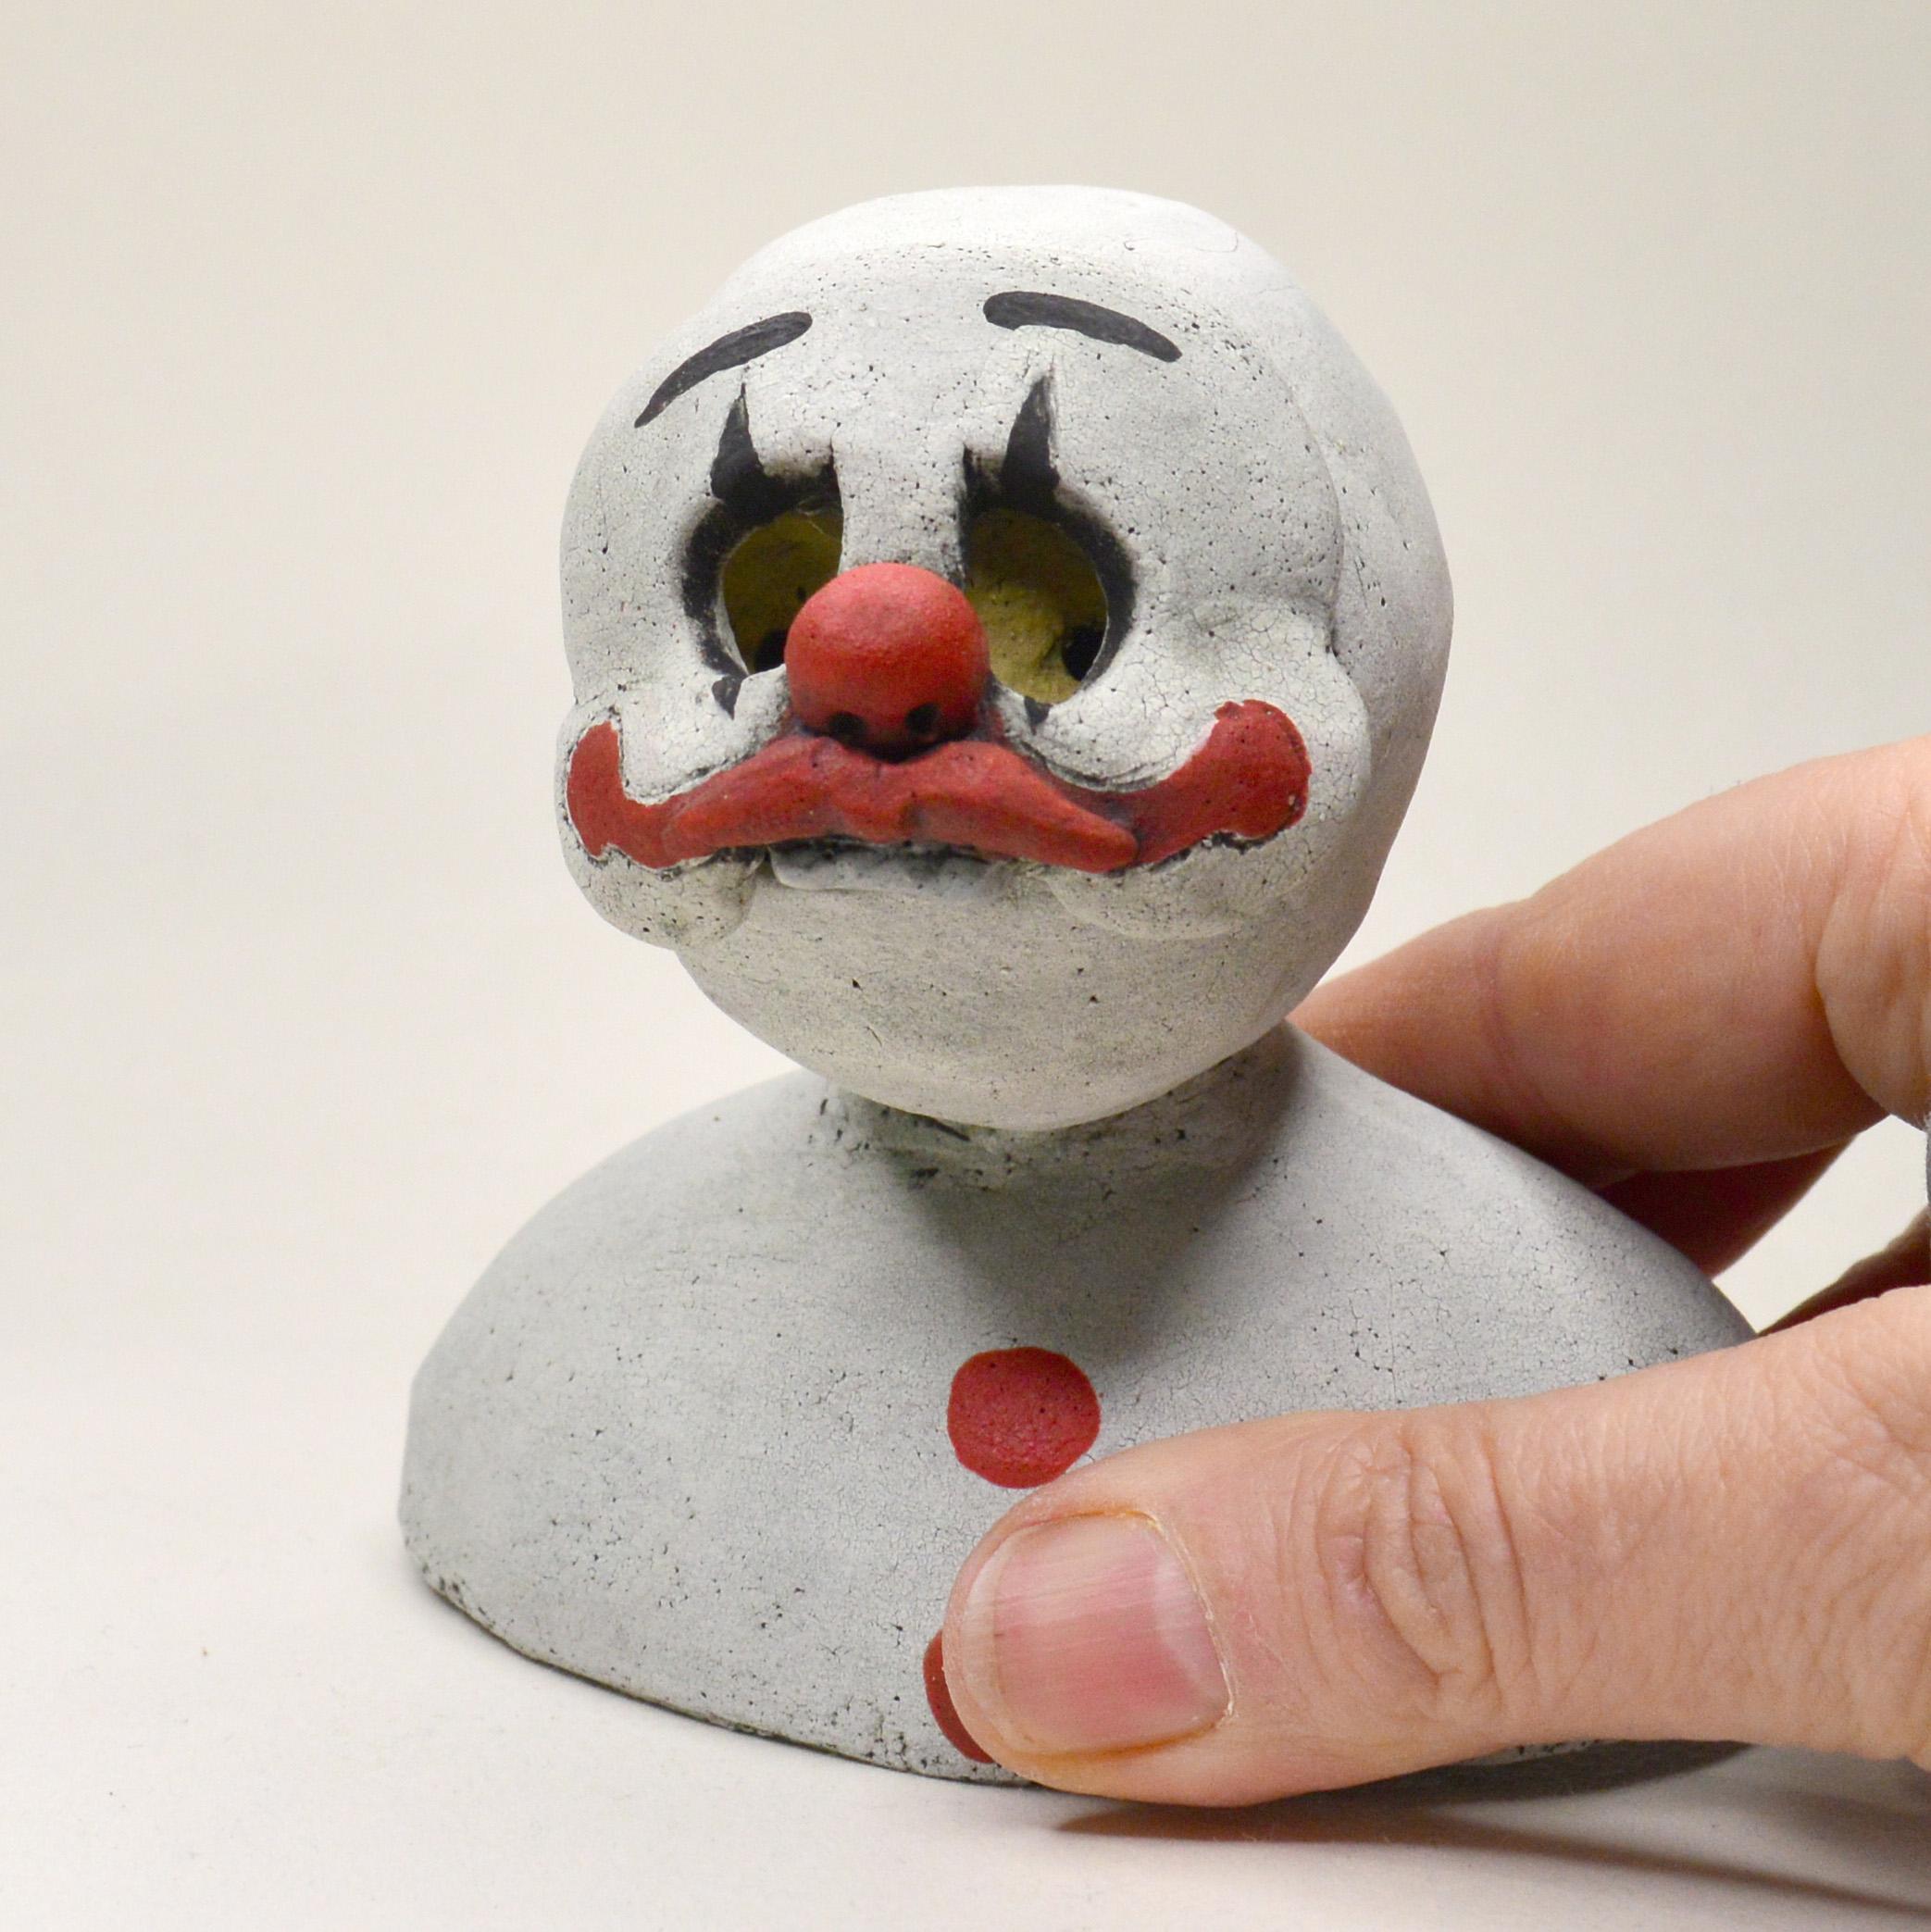 Pineco number 0011 Original Ceramic sculpture with clown mask representing melancholic reality hidden underneath the happy façade.

Meet a variety of characters with distinct masks and postures. These sculptures are fascinating and make you curious,